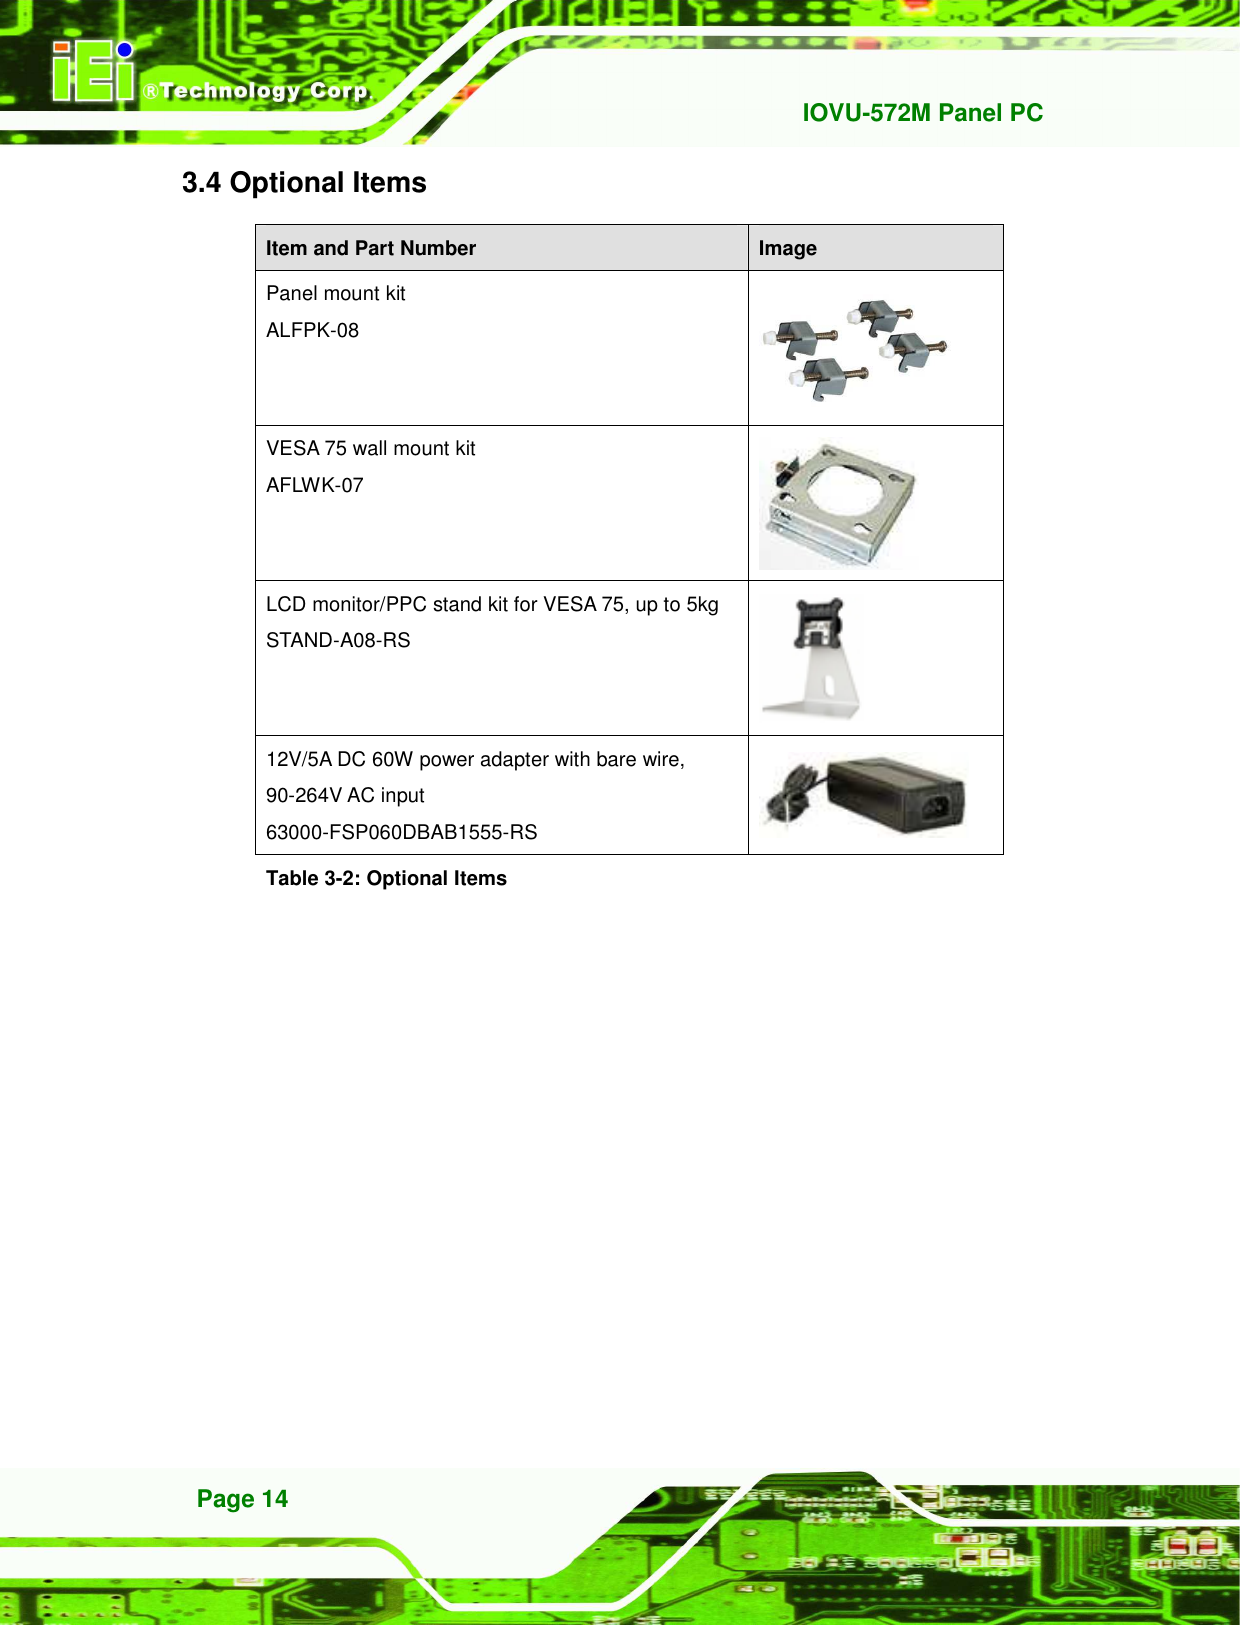   IOVU-572M Panel PC Page 14 3.4 Optional Items Item and Part Number  Image Panel mount kit ALFPK-08  VESA 75 wall mount kit AFLWK-07  LCD monitor/PPC stand kit for VESA 75, up to 5kg STAND-A08-RS  12V/5A DC 60W power adapter with bare wire, 90-264V AC input 63000-FSP060DBAB1555-RS   Table 3-2: Optional Items 